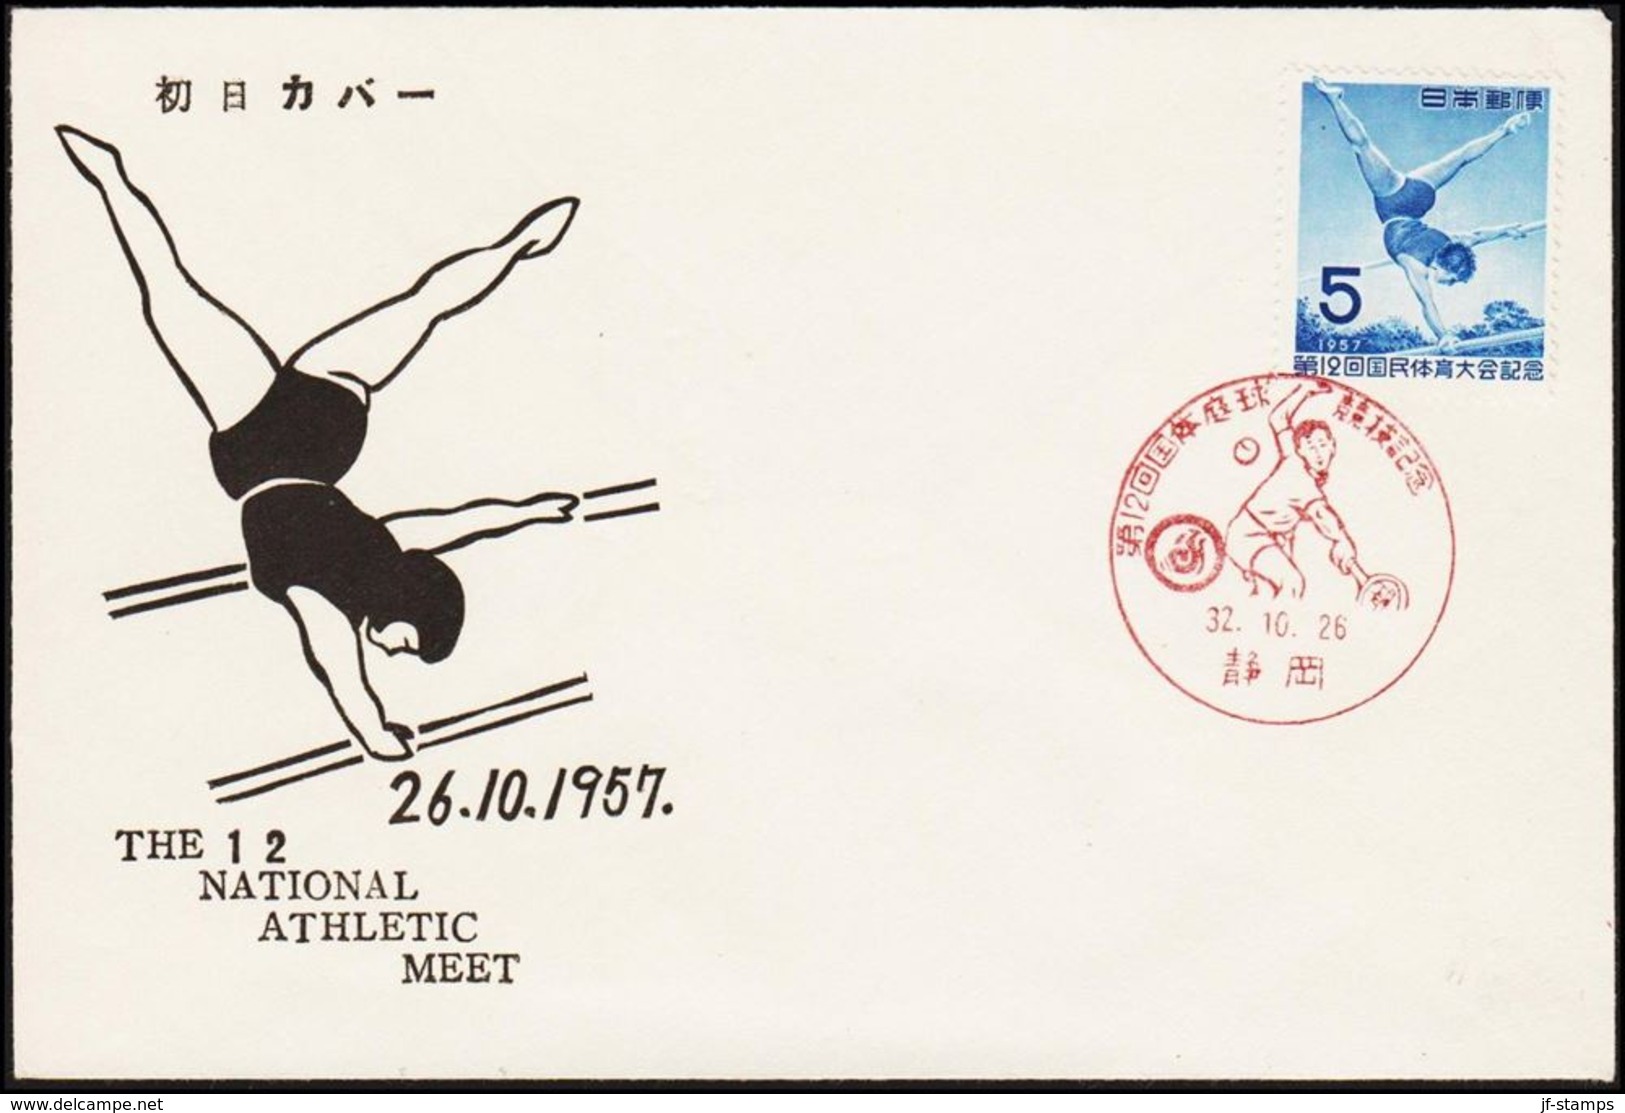 1957. 5 (Y) Sport. FDC. THE 12 NATIONAL ATHLETIC MEETING. 26.10.1957. Vignette. Speci... (Michel 672) - JF304583 - Covers & Documents